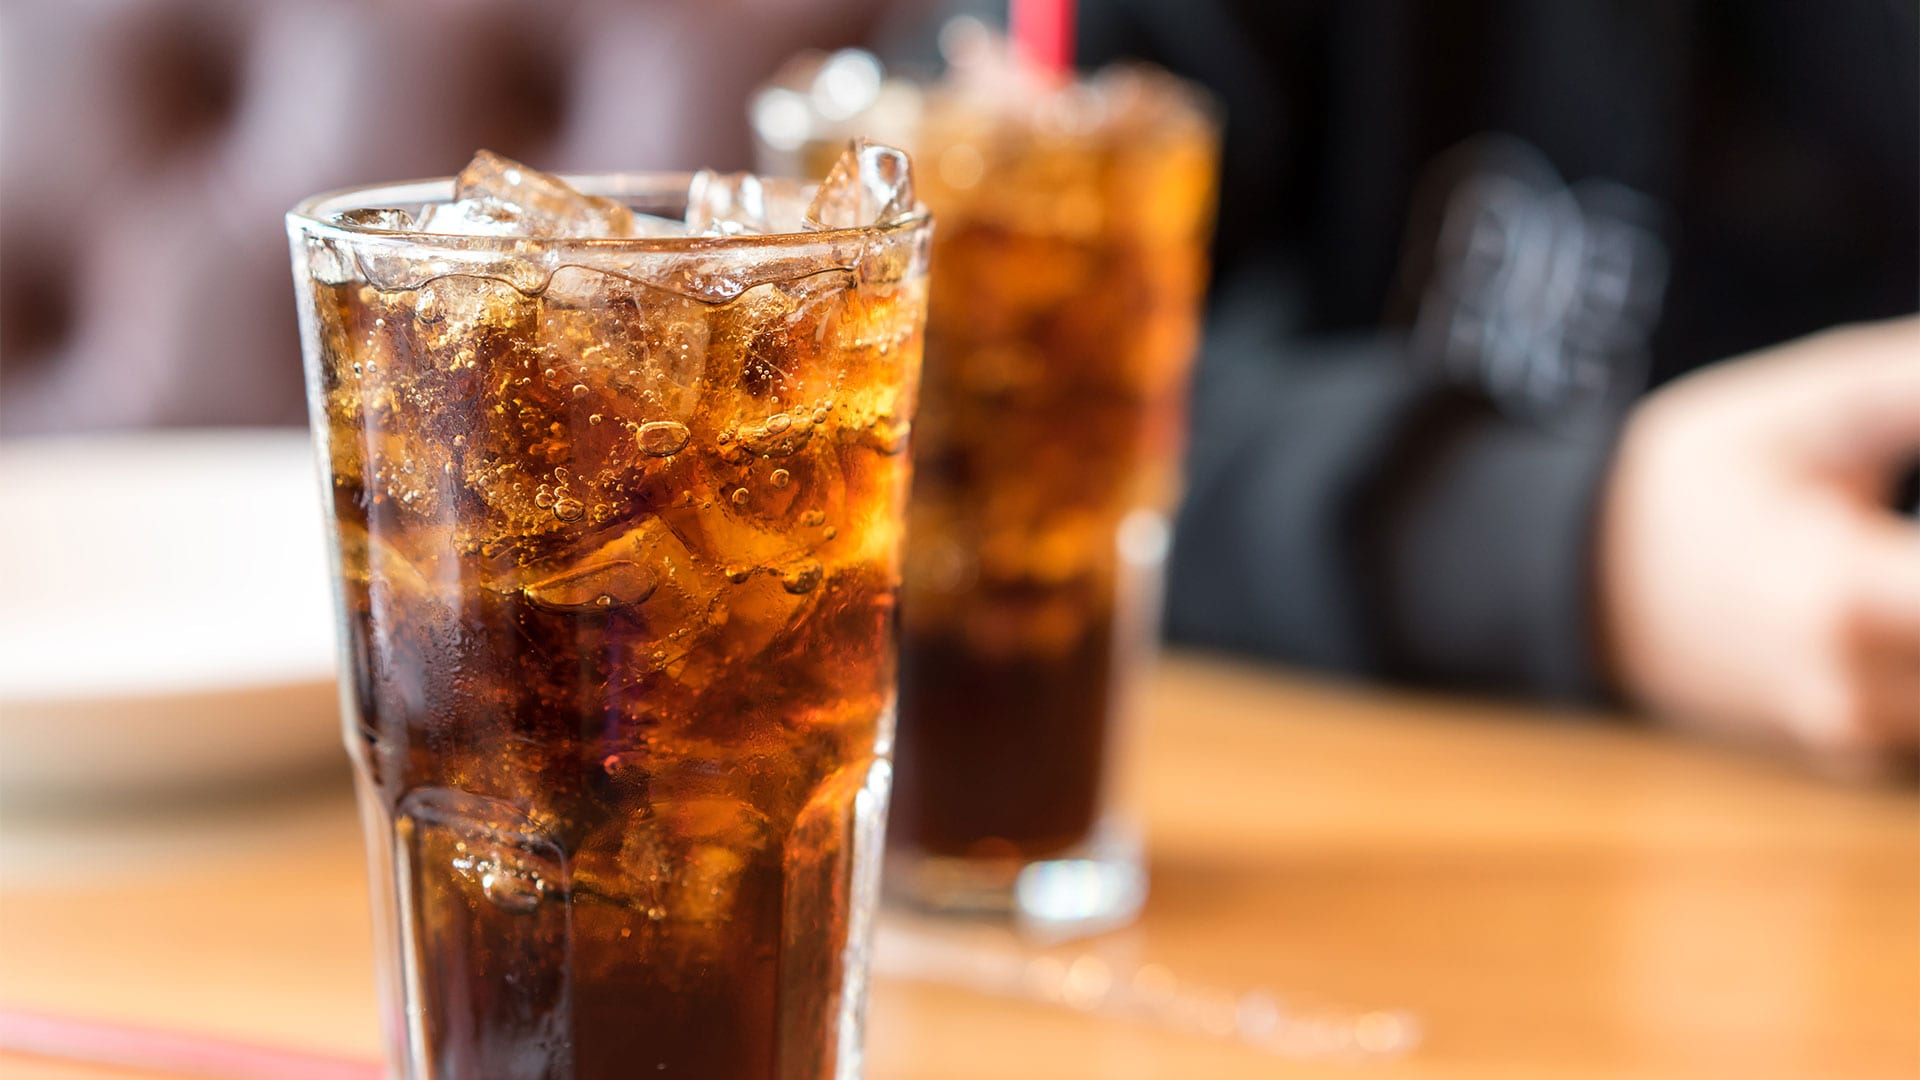 A full glass of cola reveals bubbly carbonation that's mixed with sugary, syrupy sweetness, which is bad for your teeth.